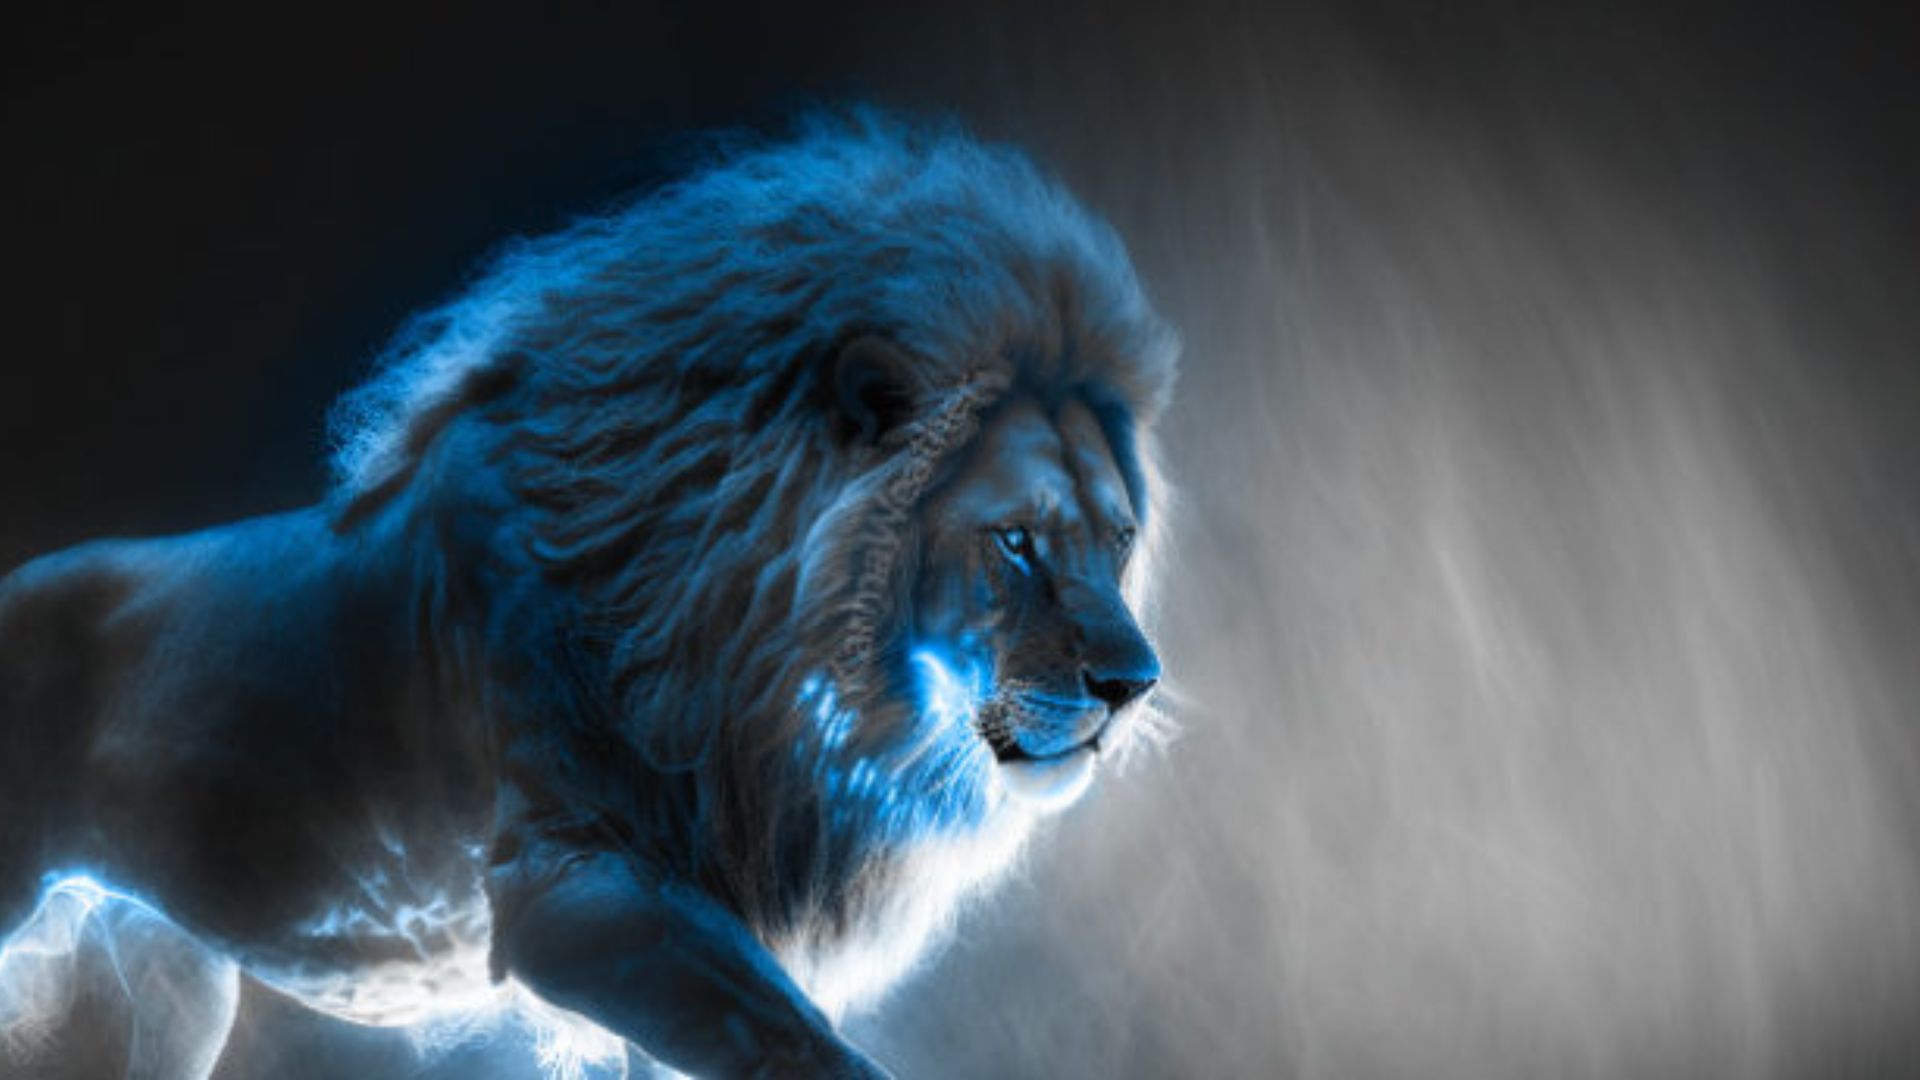 Great Art Of Lion